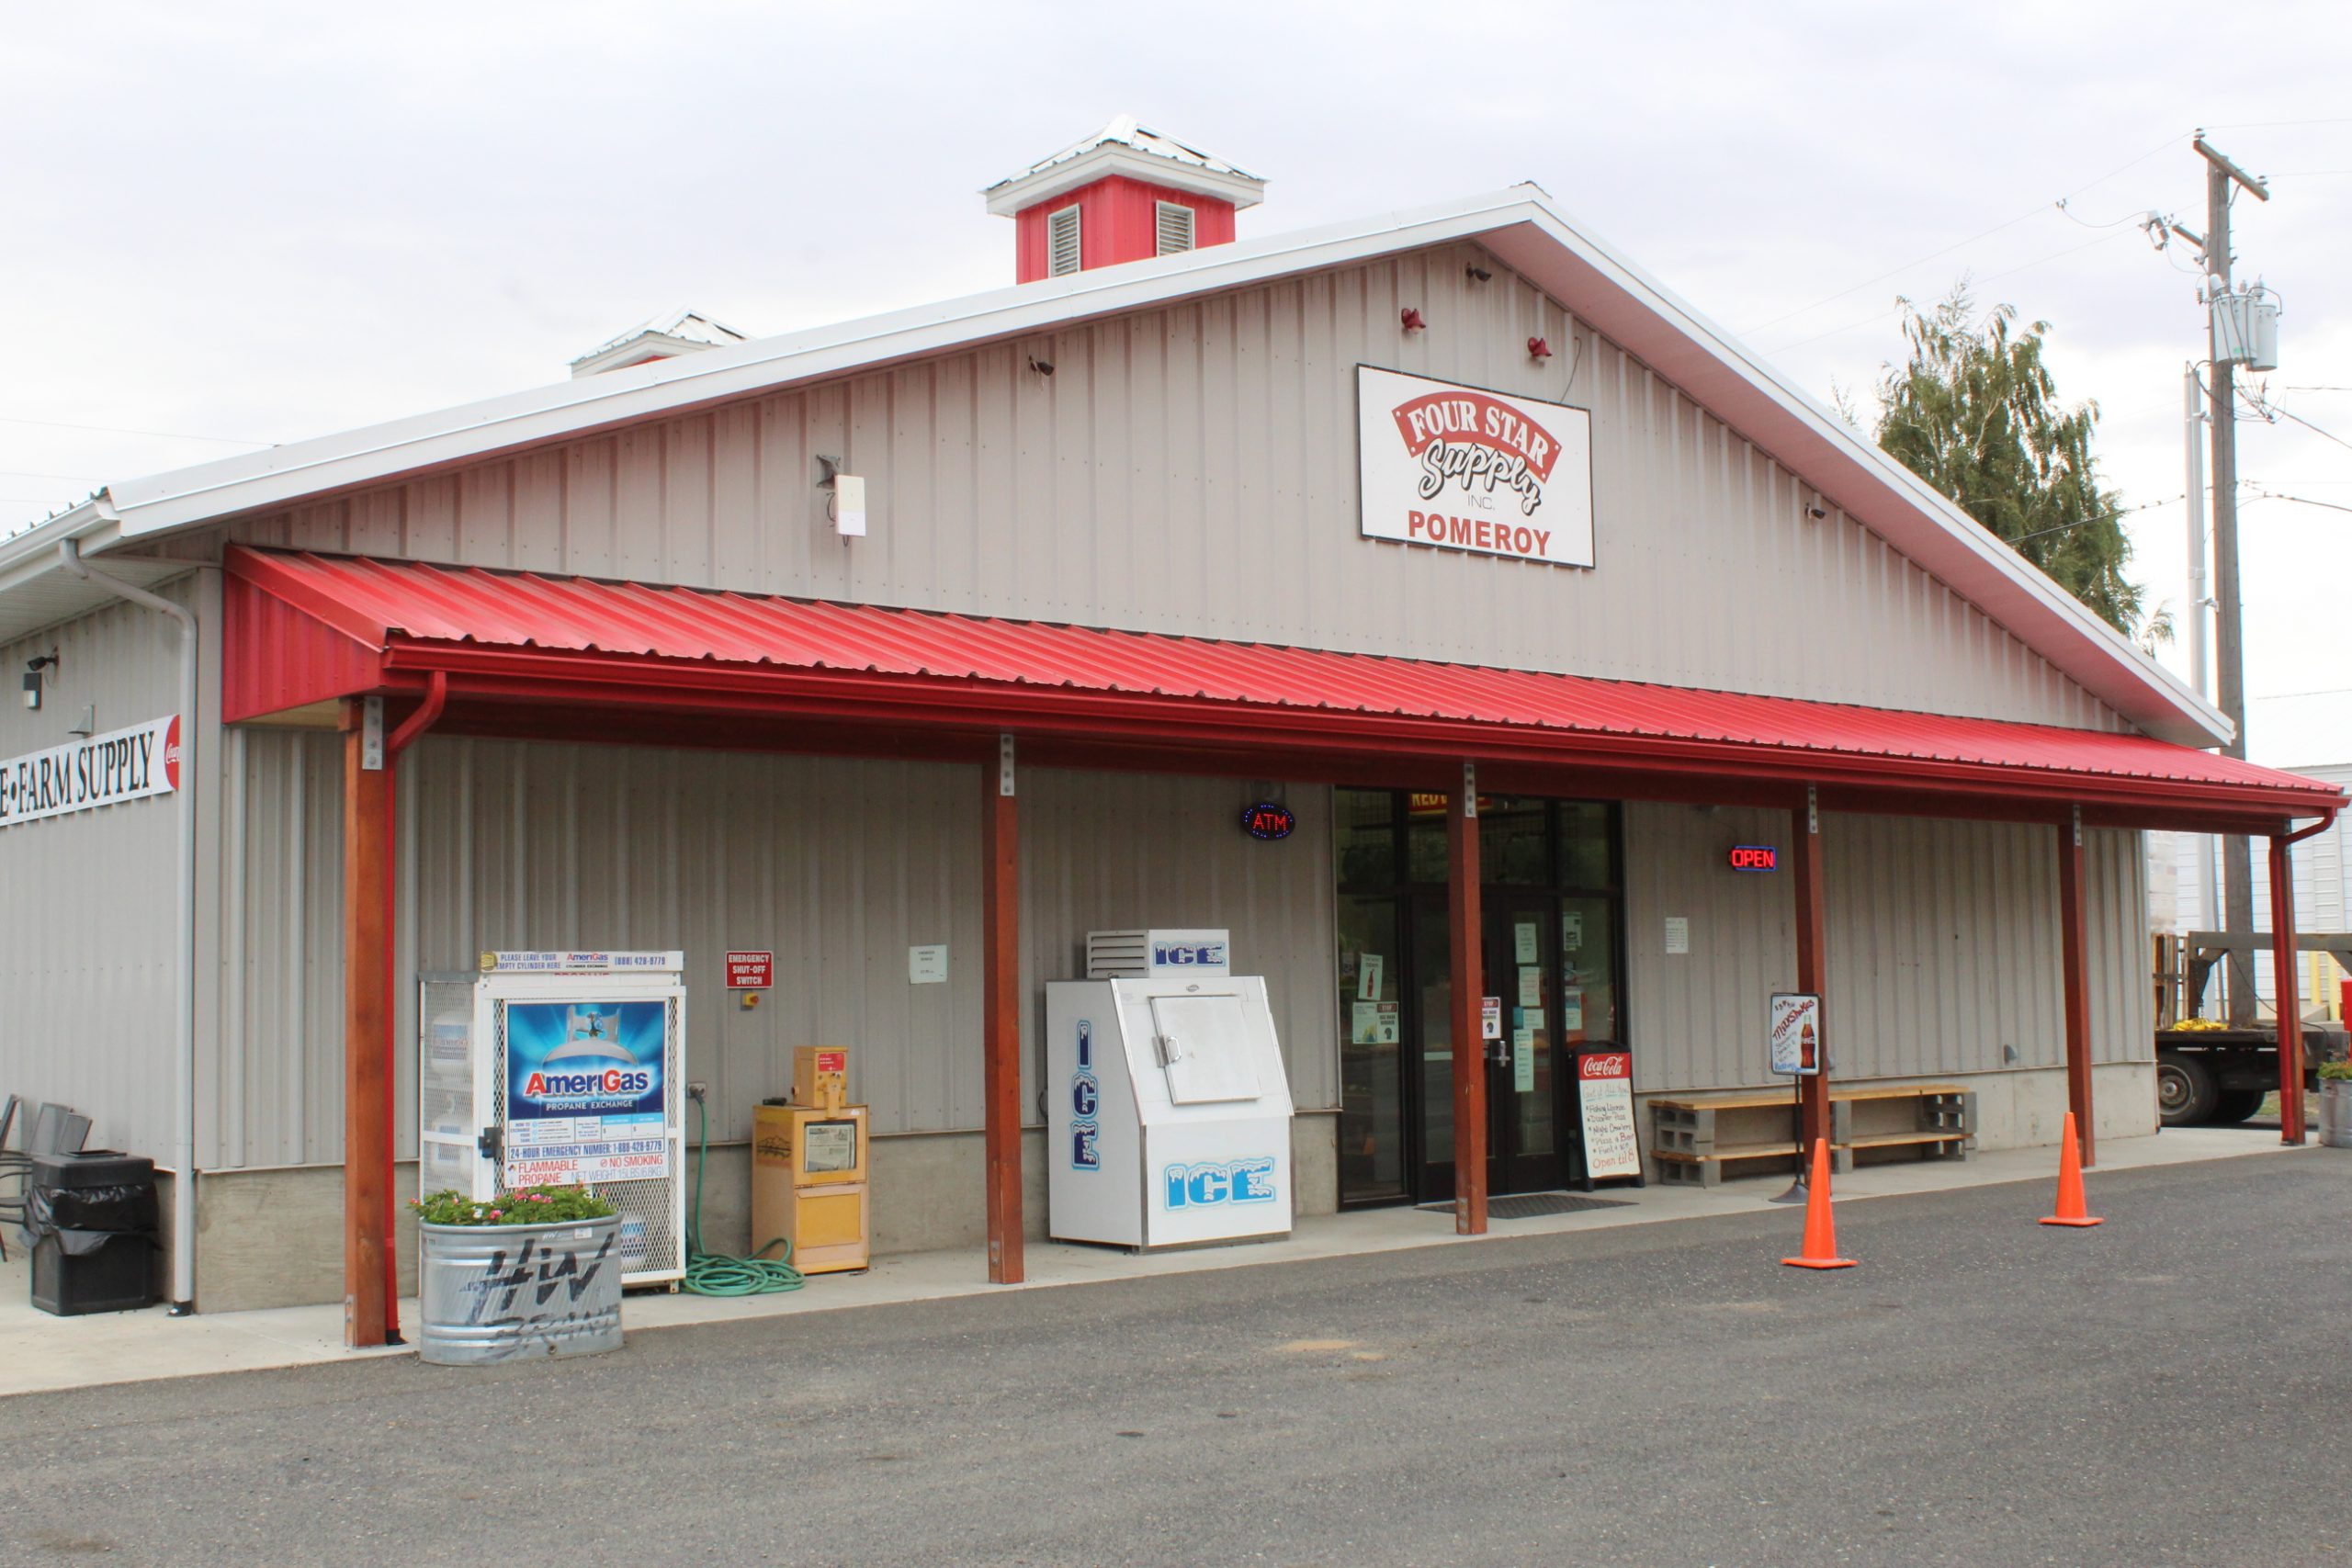 An Image of Four Star Supply Pomeroy Location Exterior